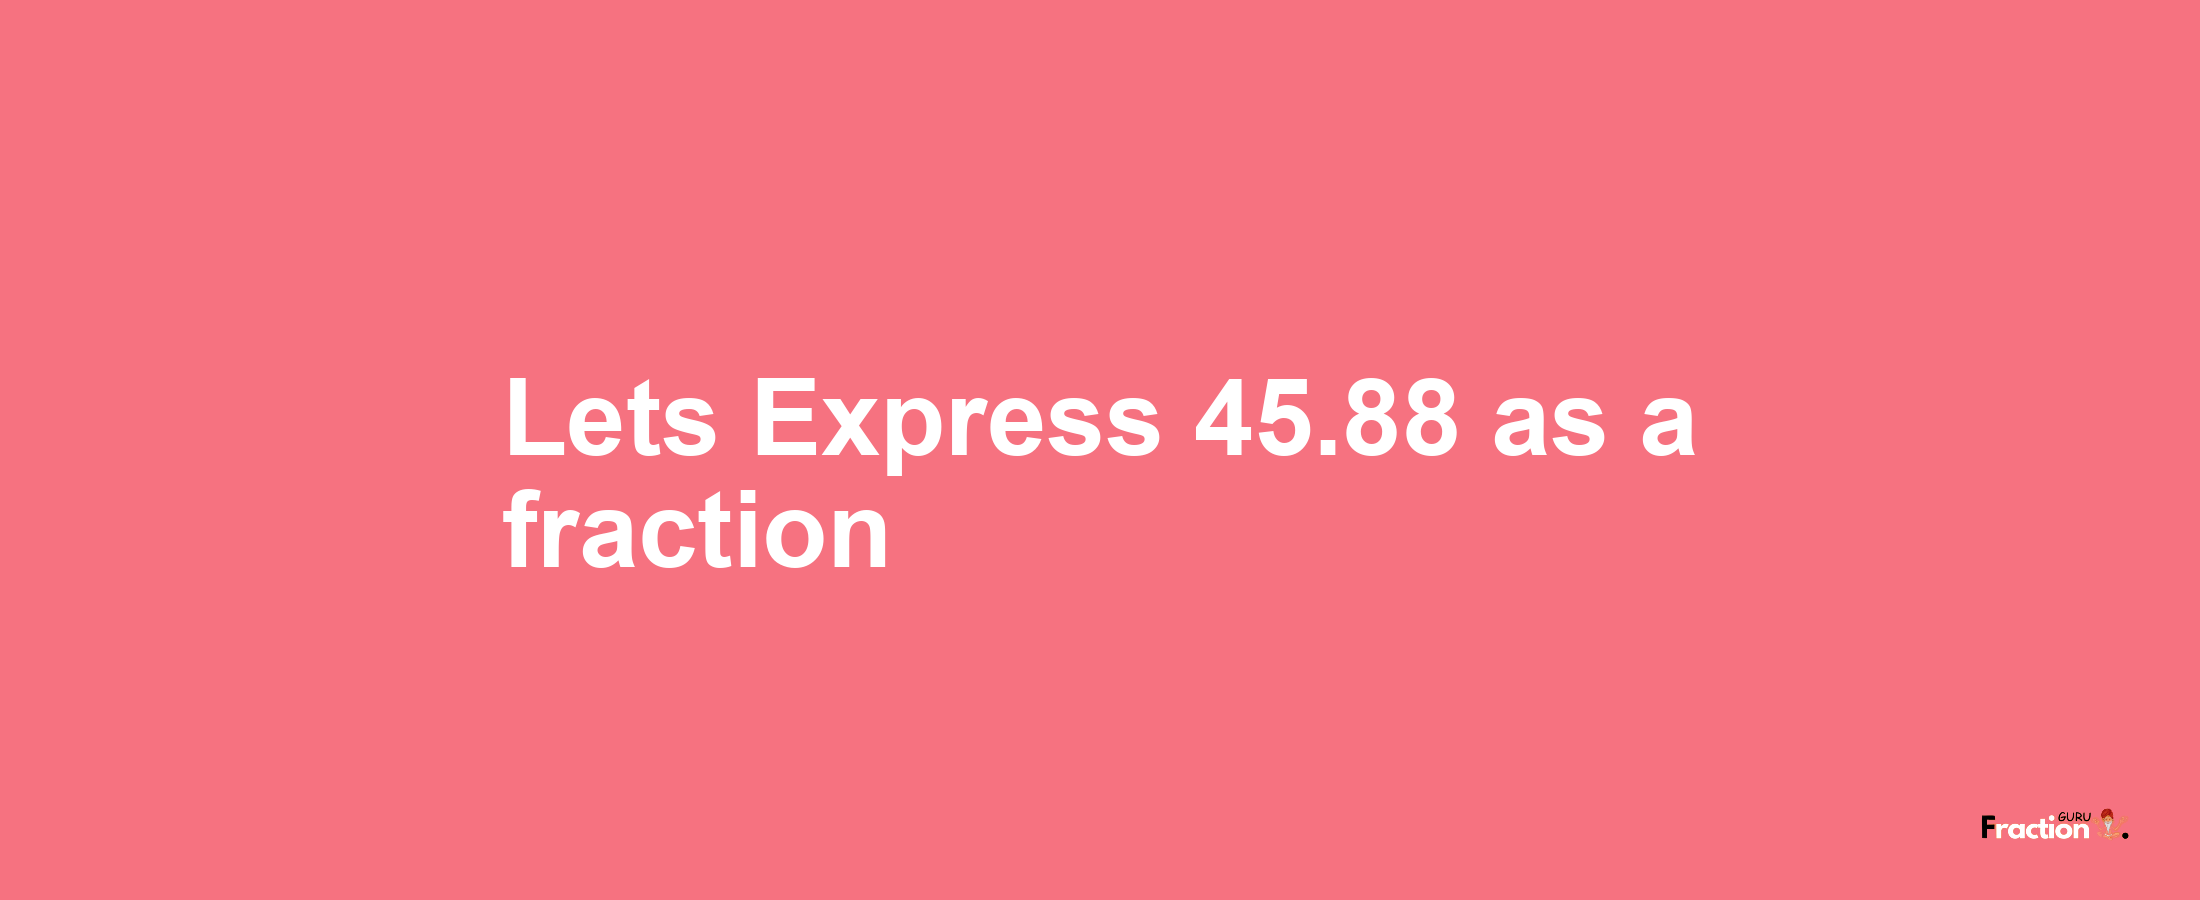 Lets Express 45.88 as afraction